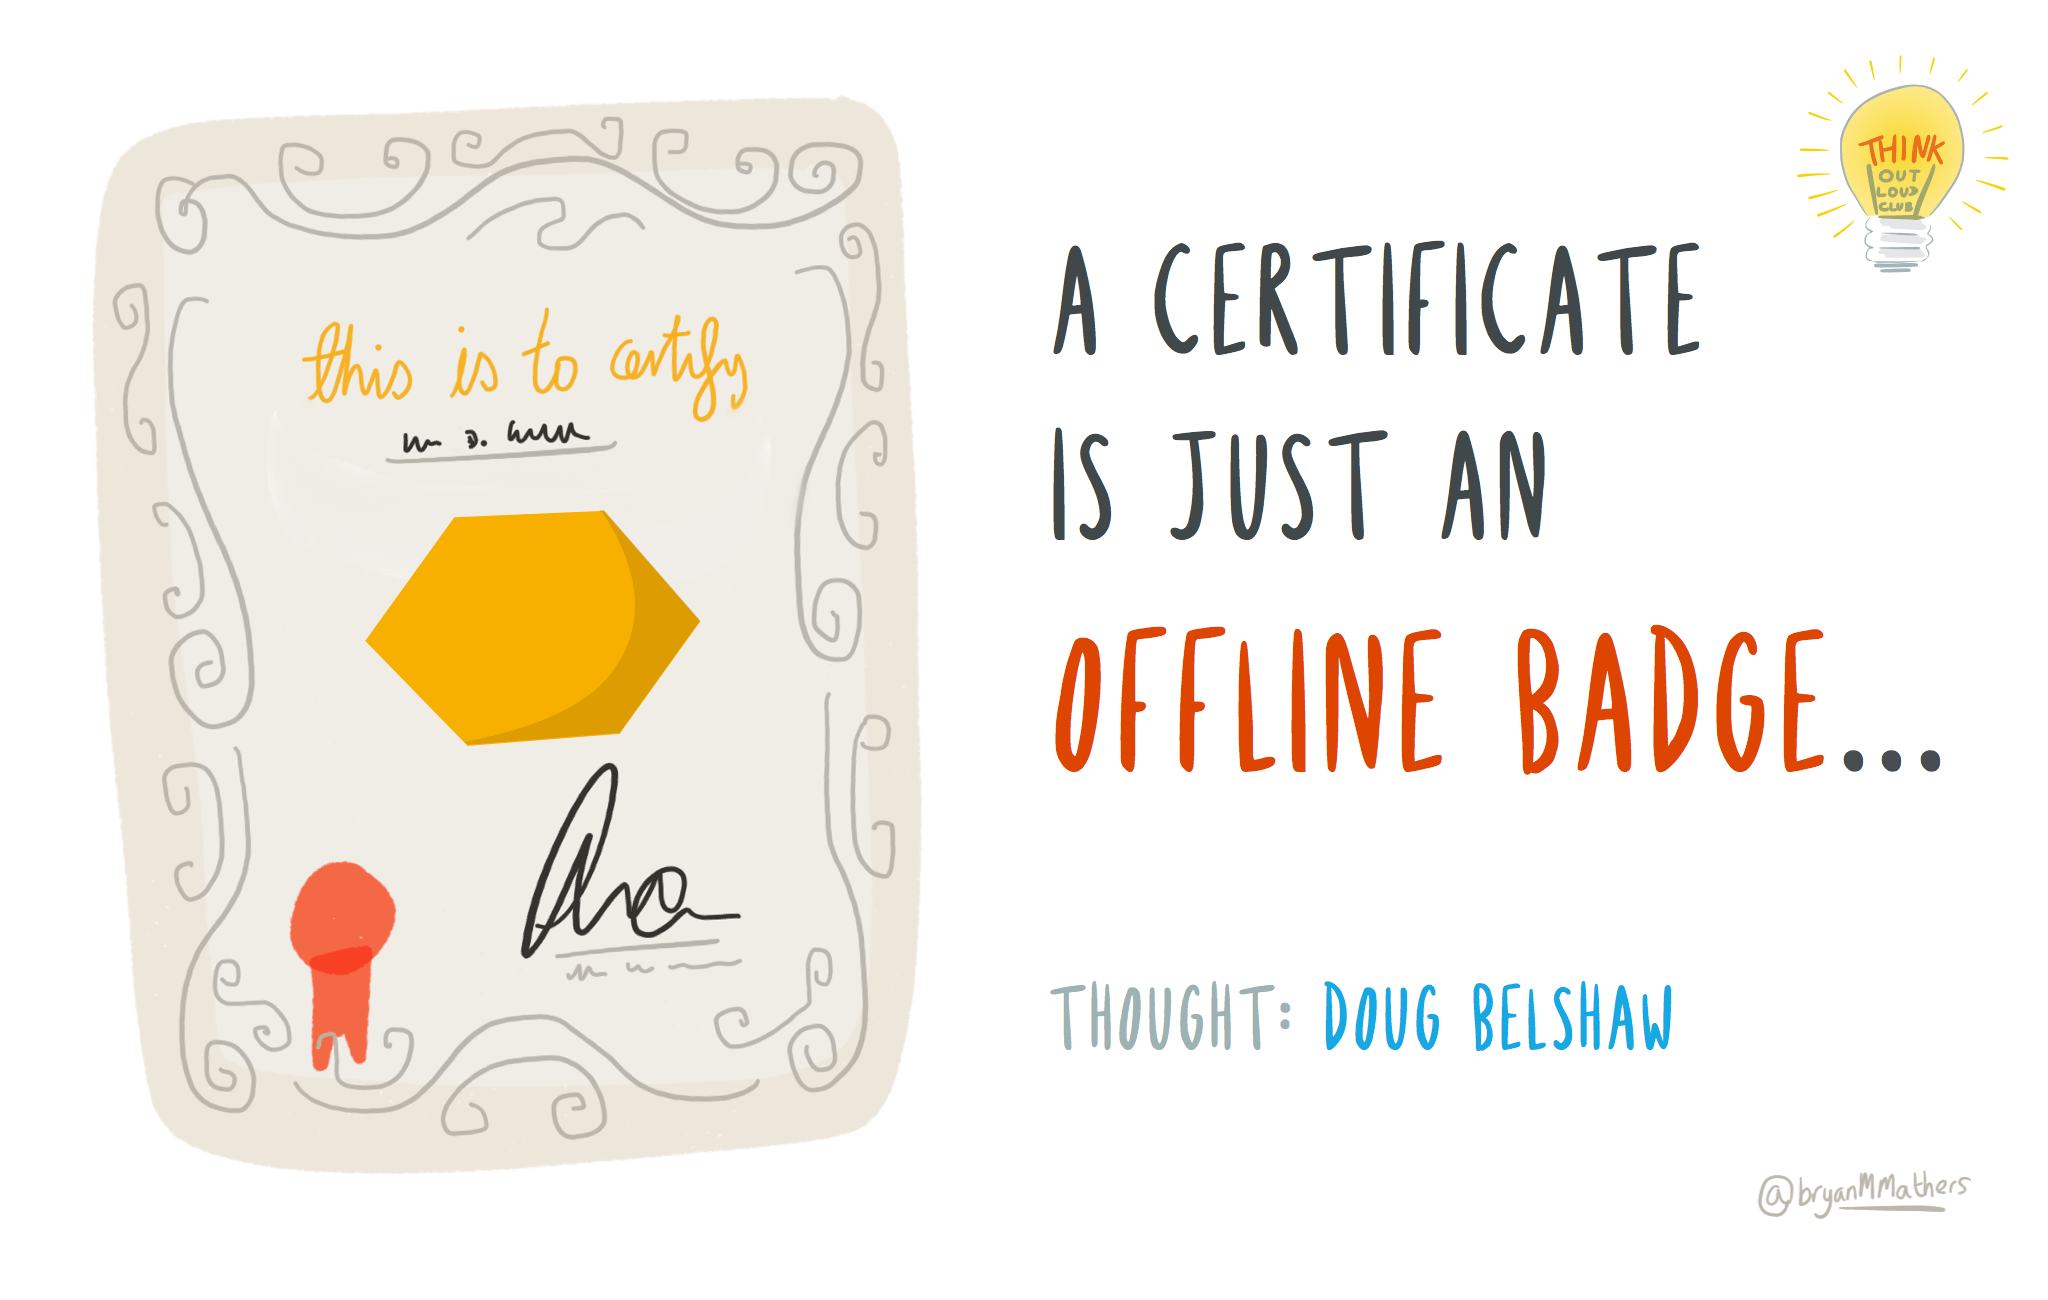 Level up, achievement unlocked! A degree certificate is a milestone that provides evidence of your academic knowledge and skills gained while at University. A certificate is just an offline badge by Visual Thinkery is licensed under CC-BY-ND via Doug Belshaw